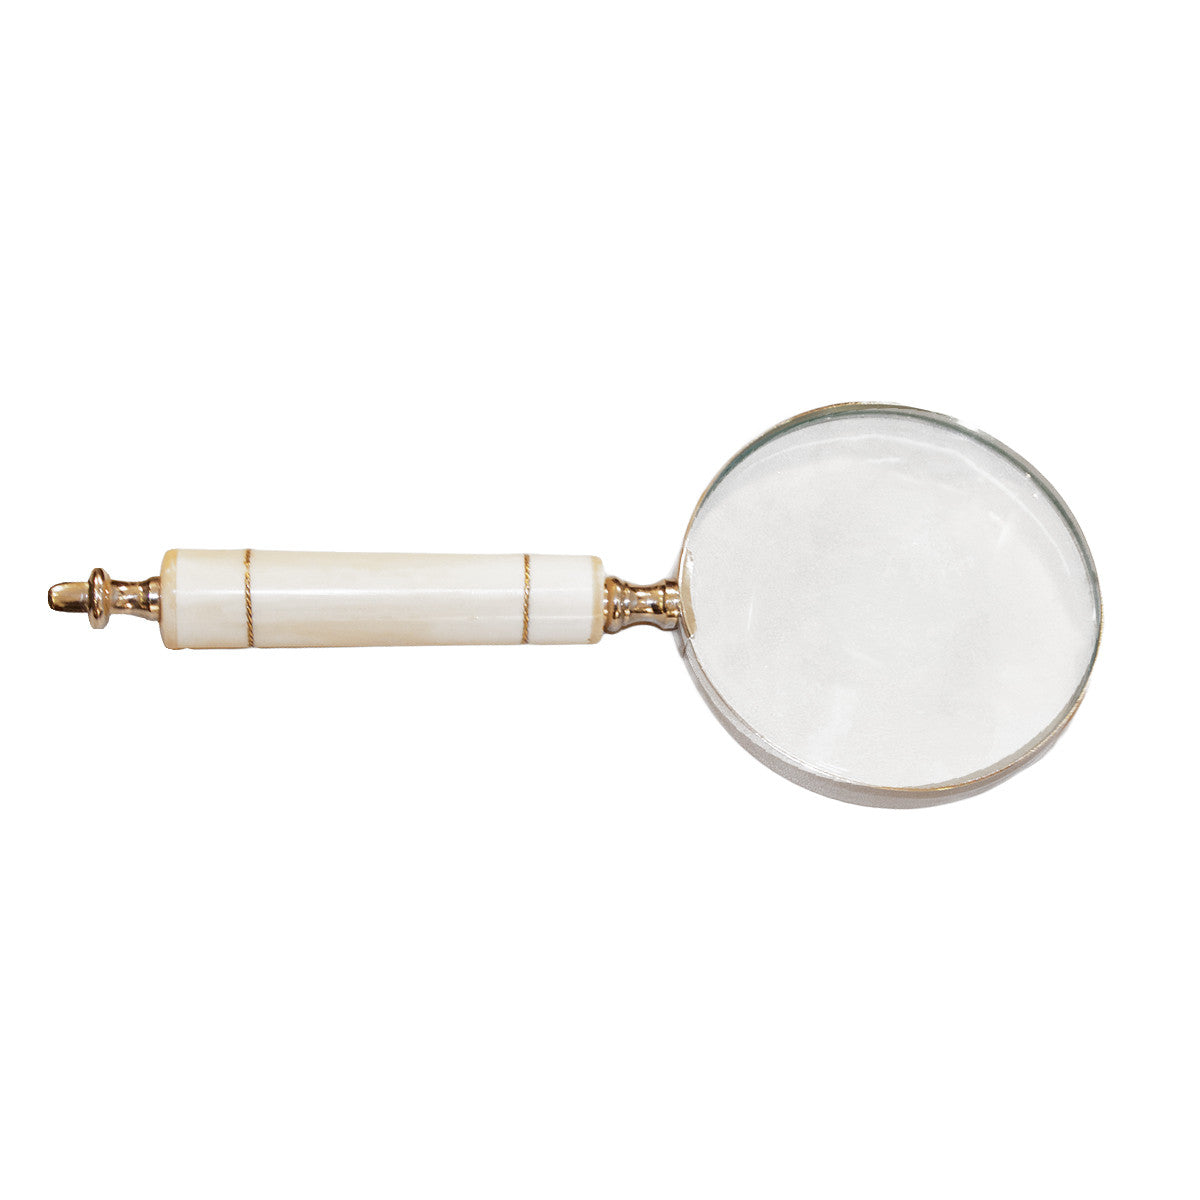 Natural horn magnifier with gold rings makes an elegant desk accessory. 